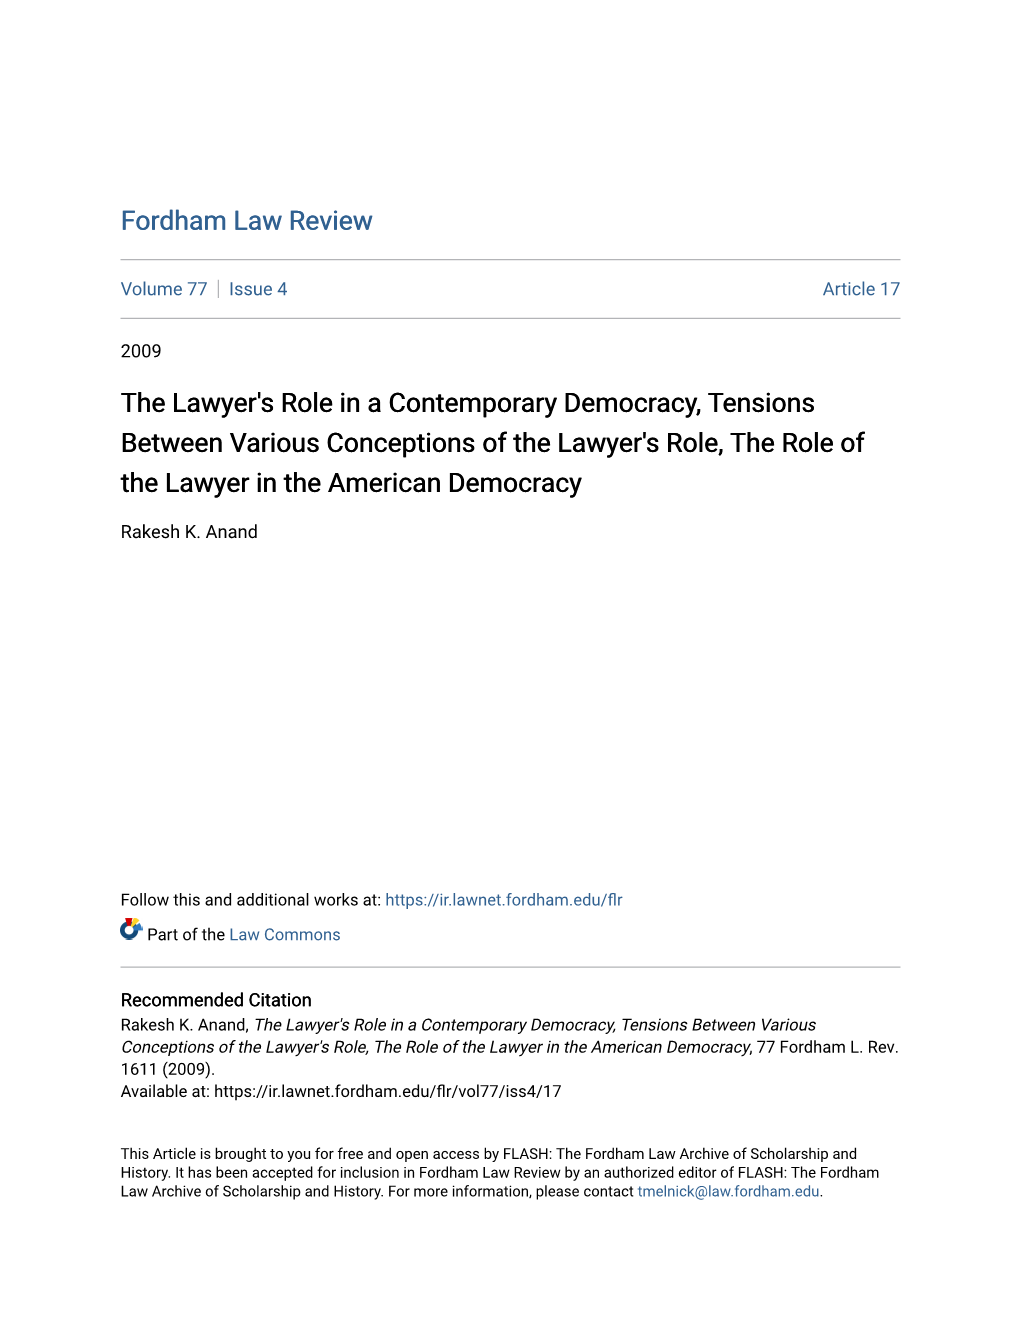 The Lawyer's Role in a Contemporary Democracy, Tensions Between Various Conceptions of the Lawyer's Role, the Role of the Lawyer in the American Democracy